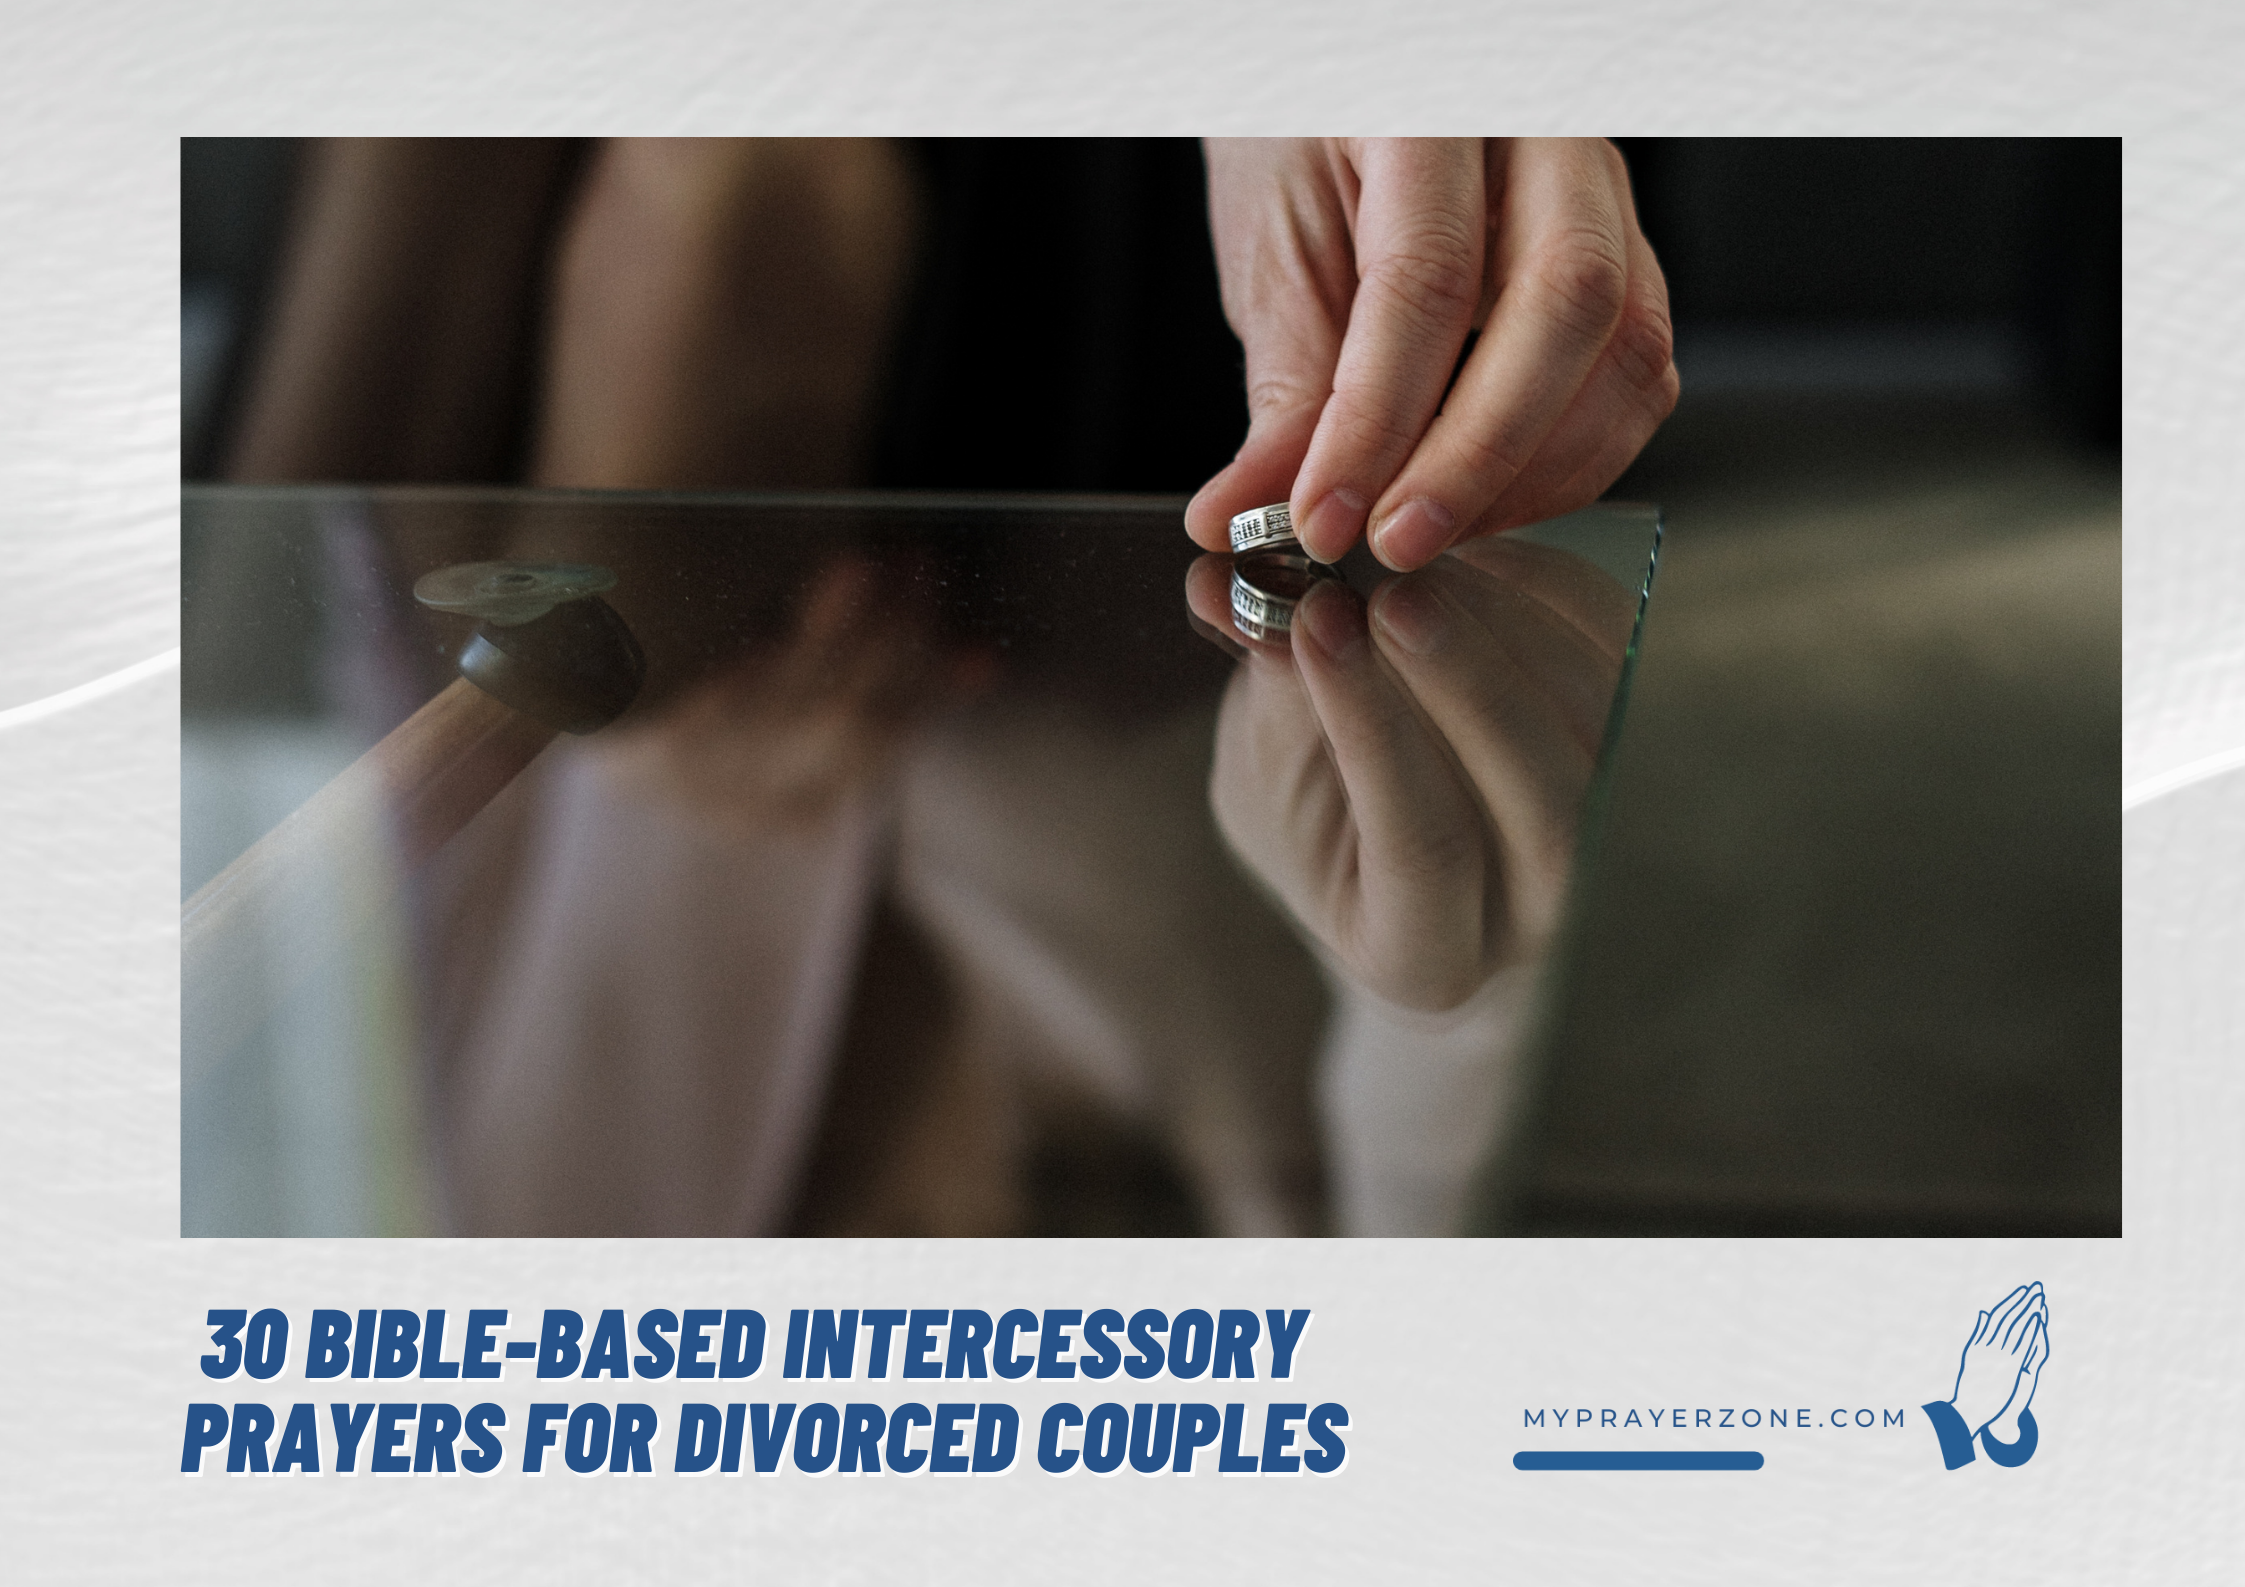  30 Bible-Based Intercessory Prayers for Divorced Couples